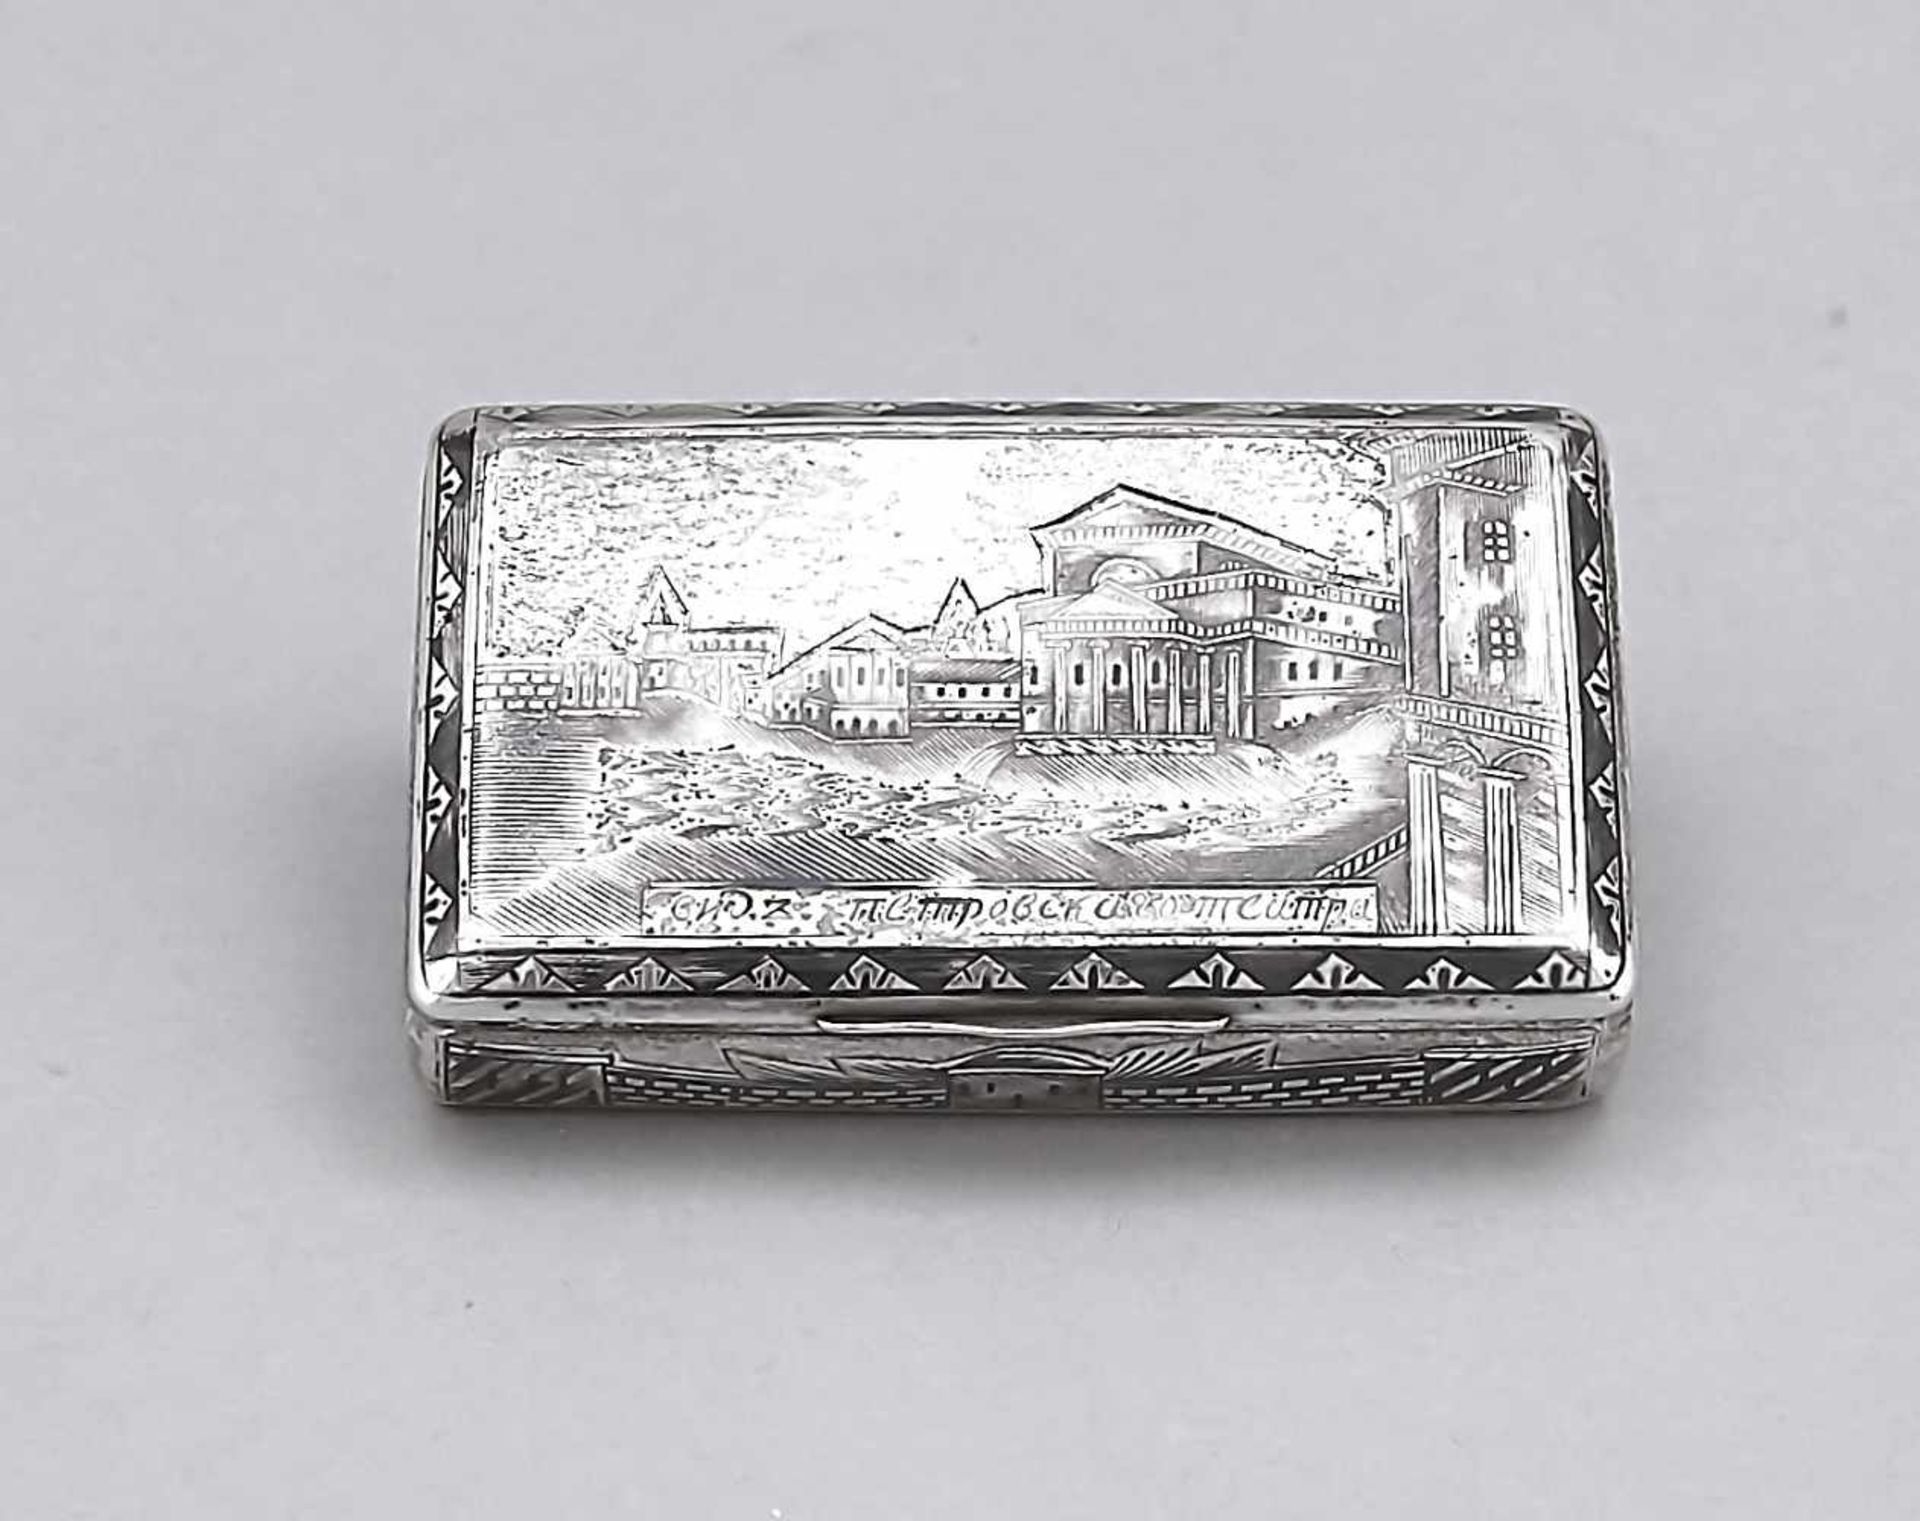 Rectangular tabatiere, marked Russia, probably around 1830, unclear hallmarked, silver 84